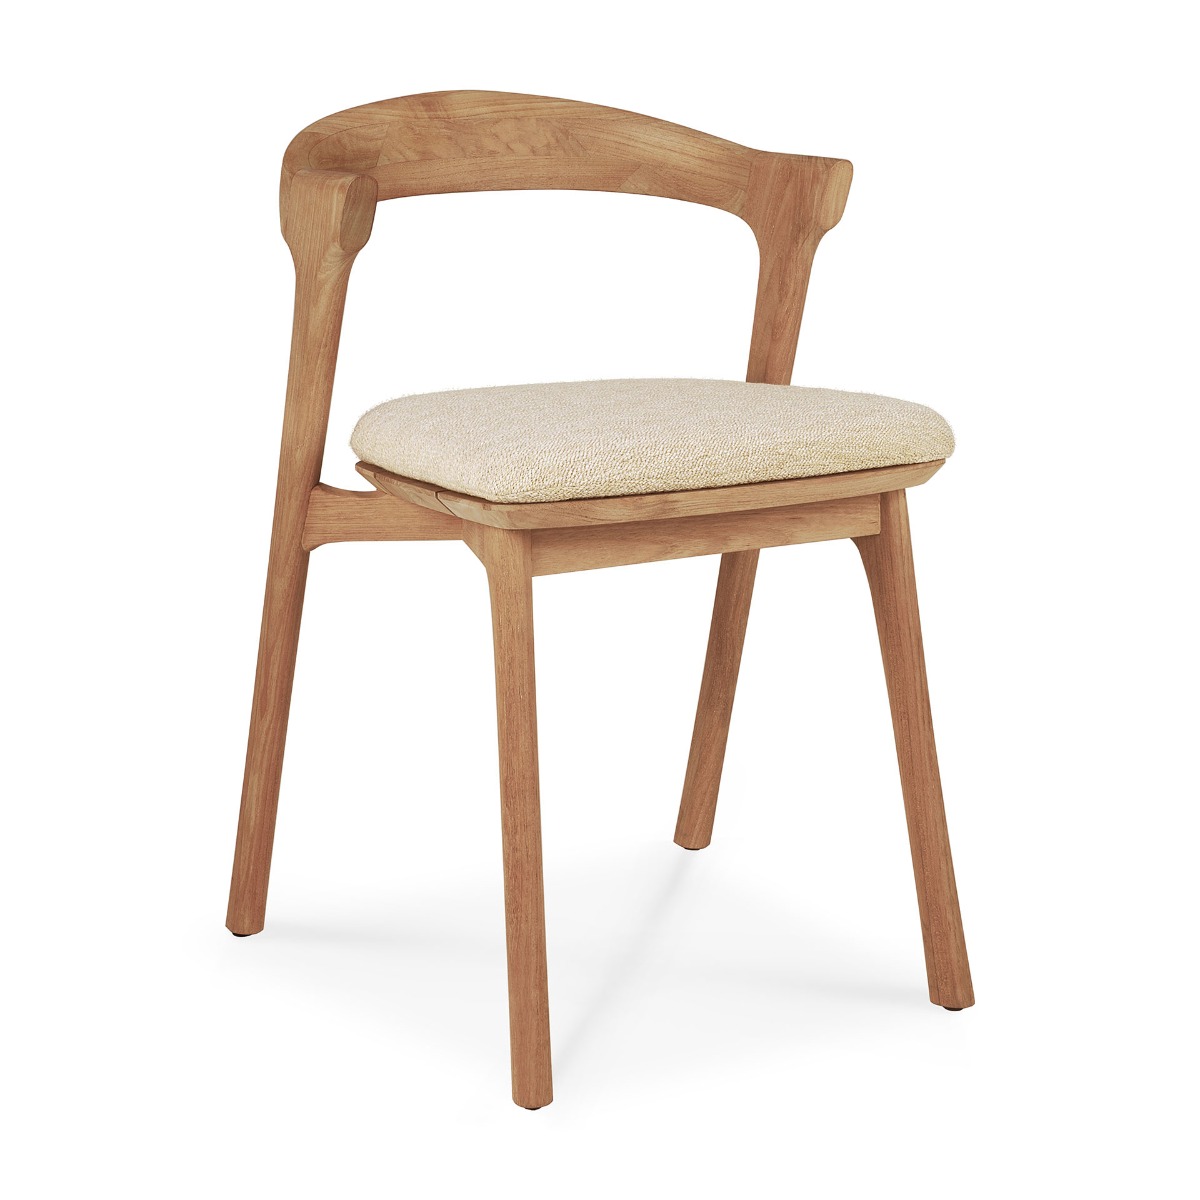 Teak Bok outdoor dining chair with cushion natural